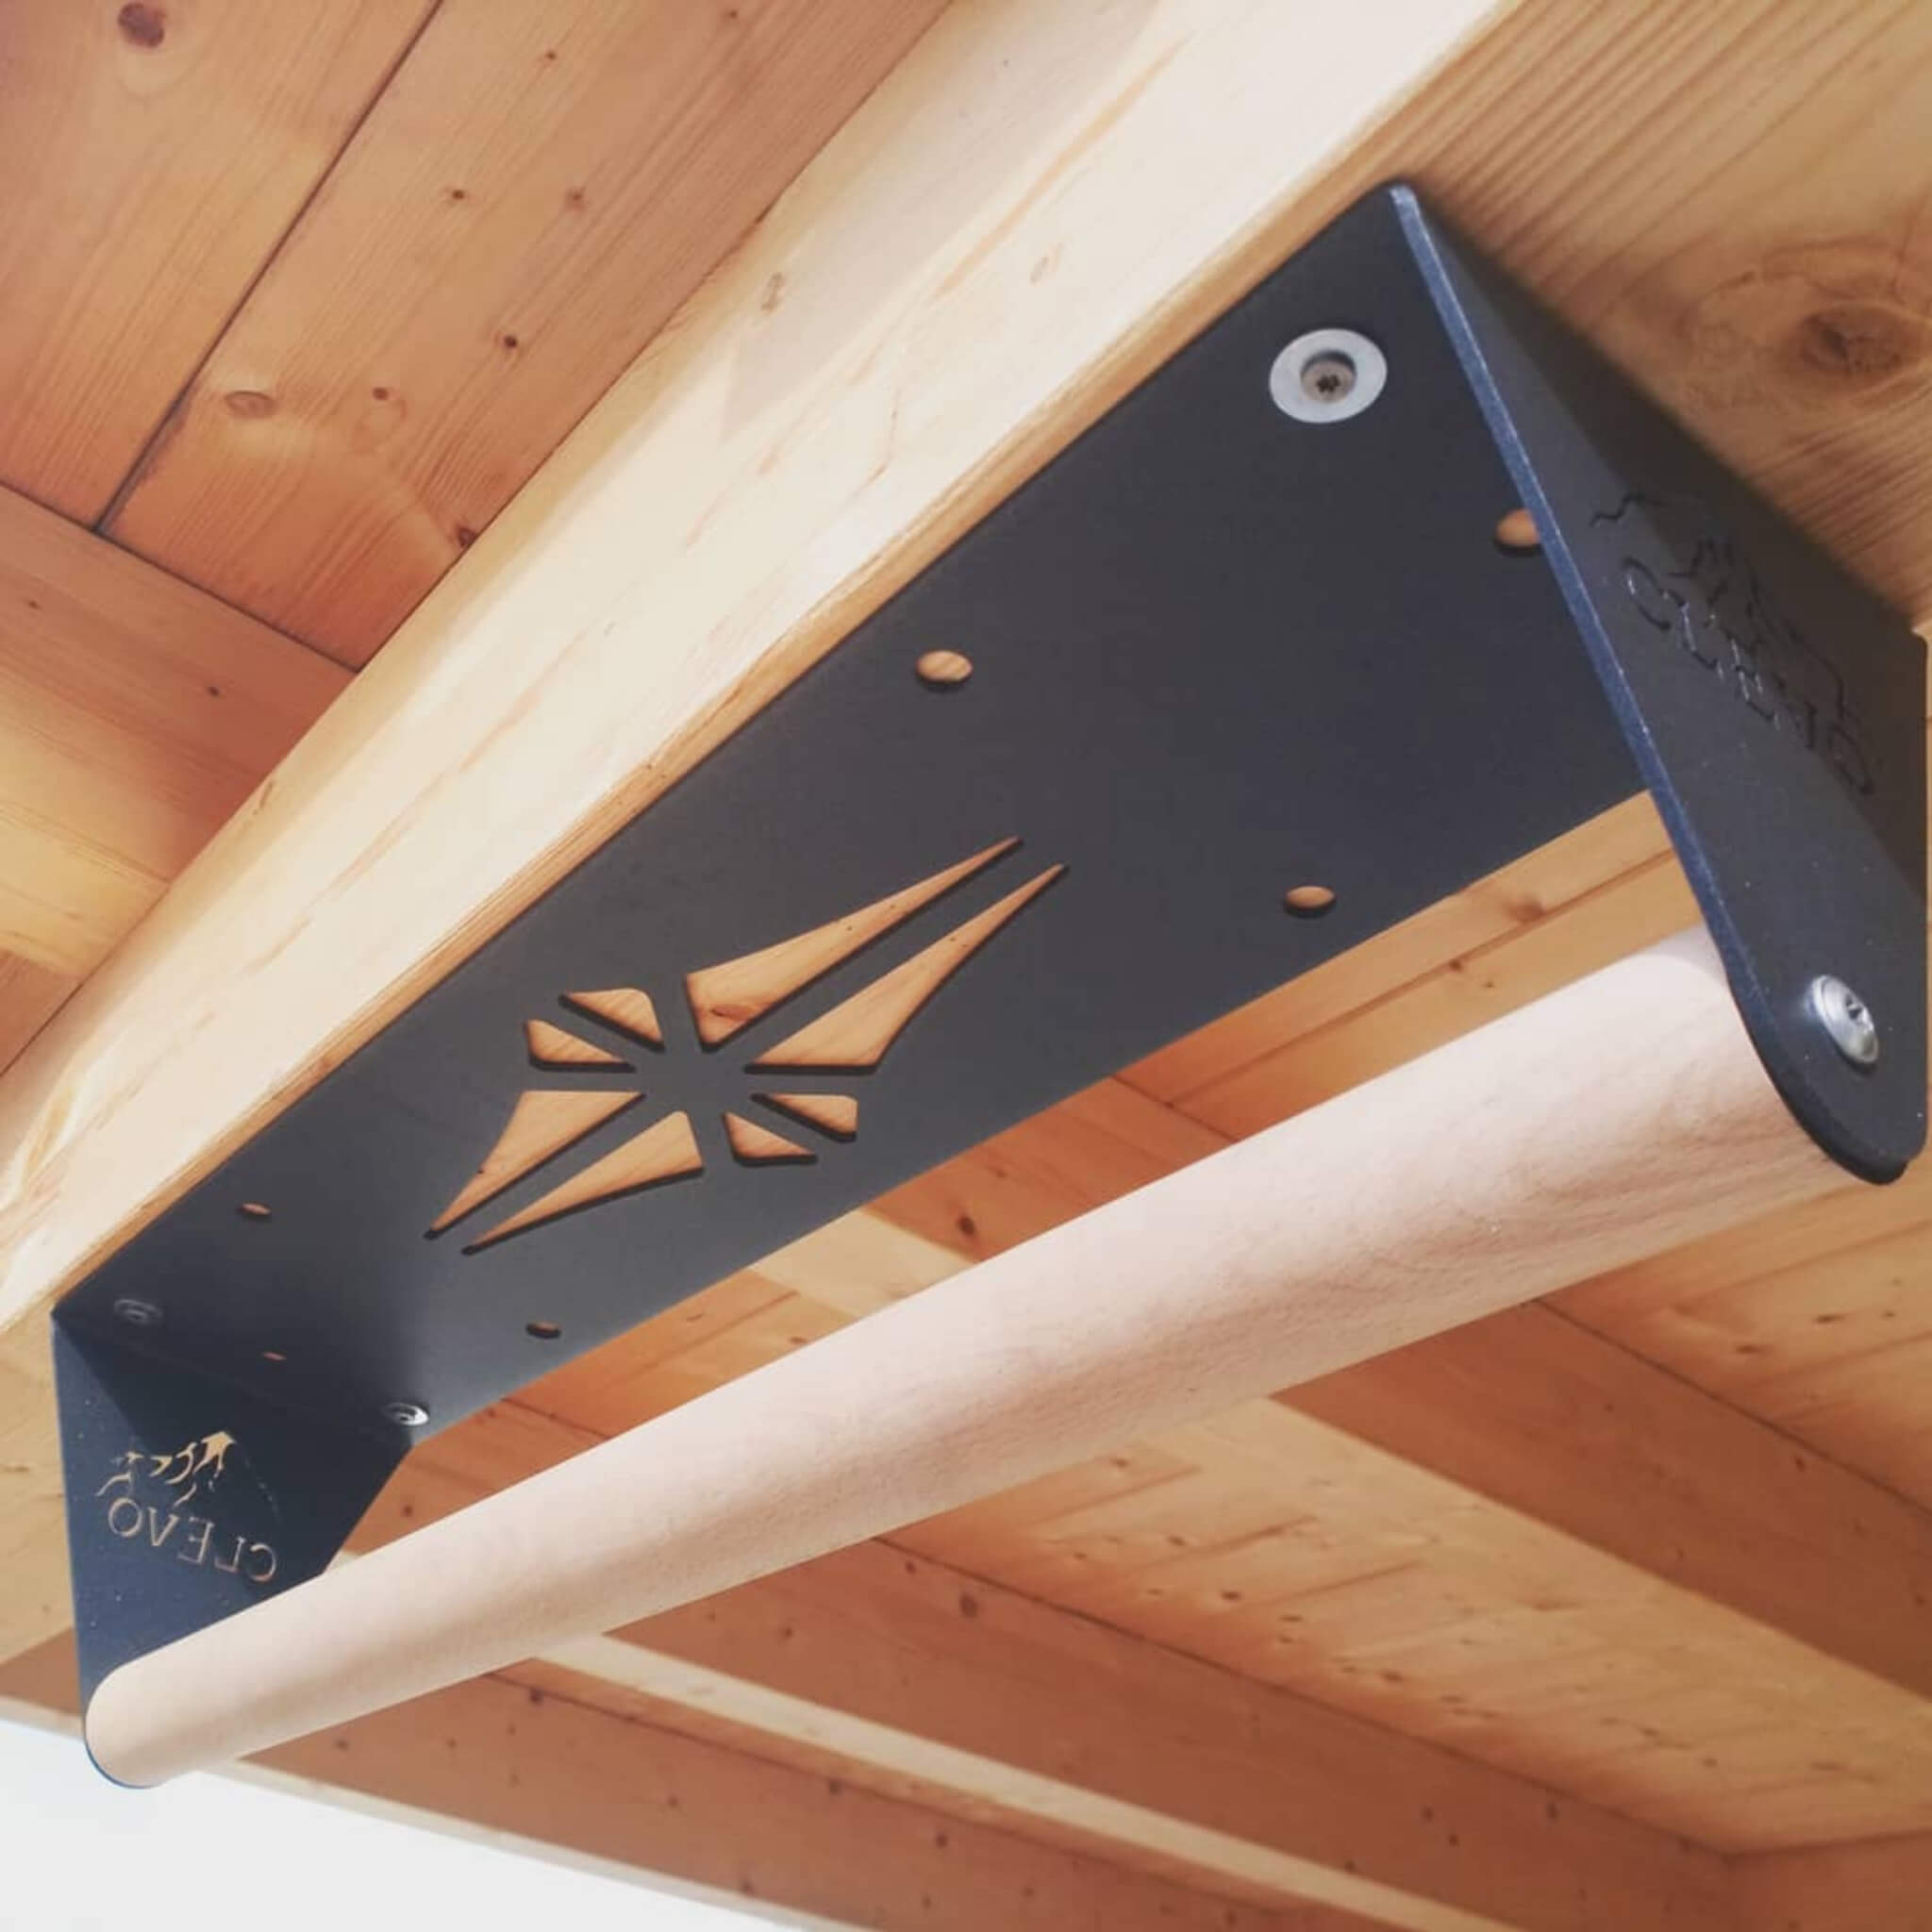 CLEVO XS: Wooden Pull up Bar For the Ceiling For Climbers